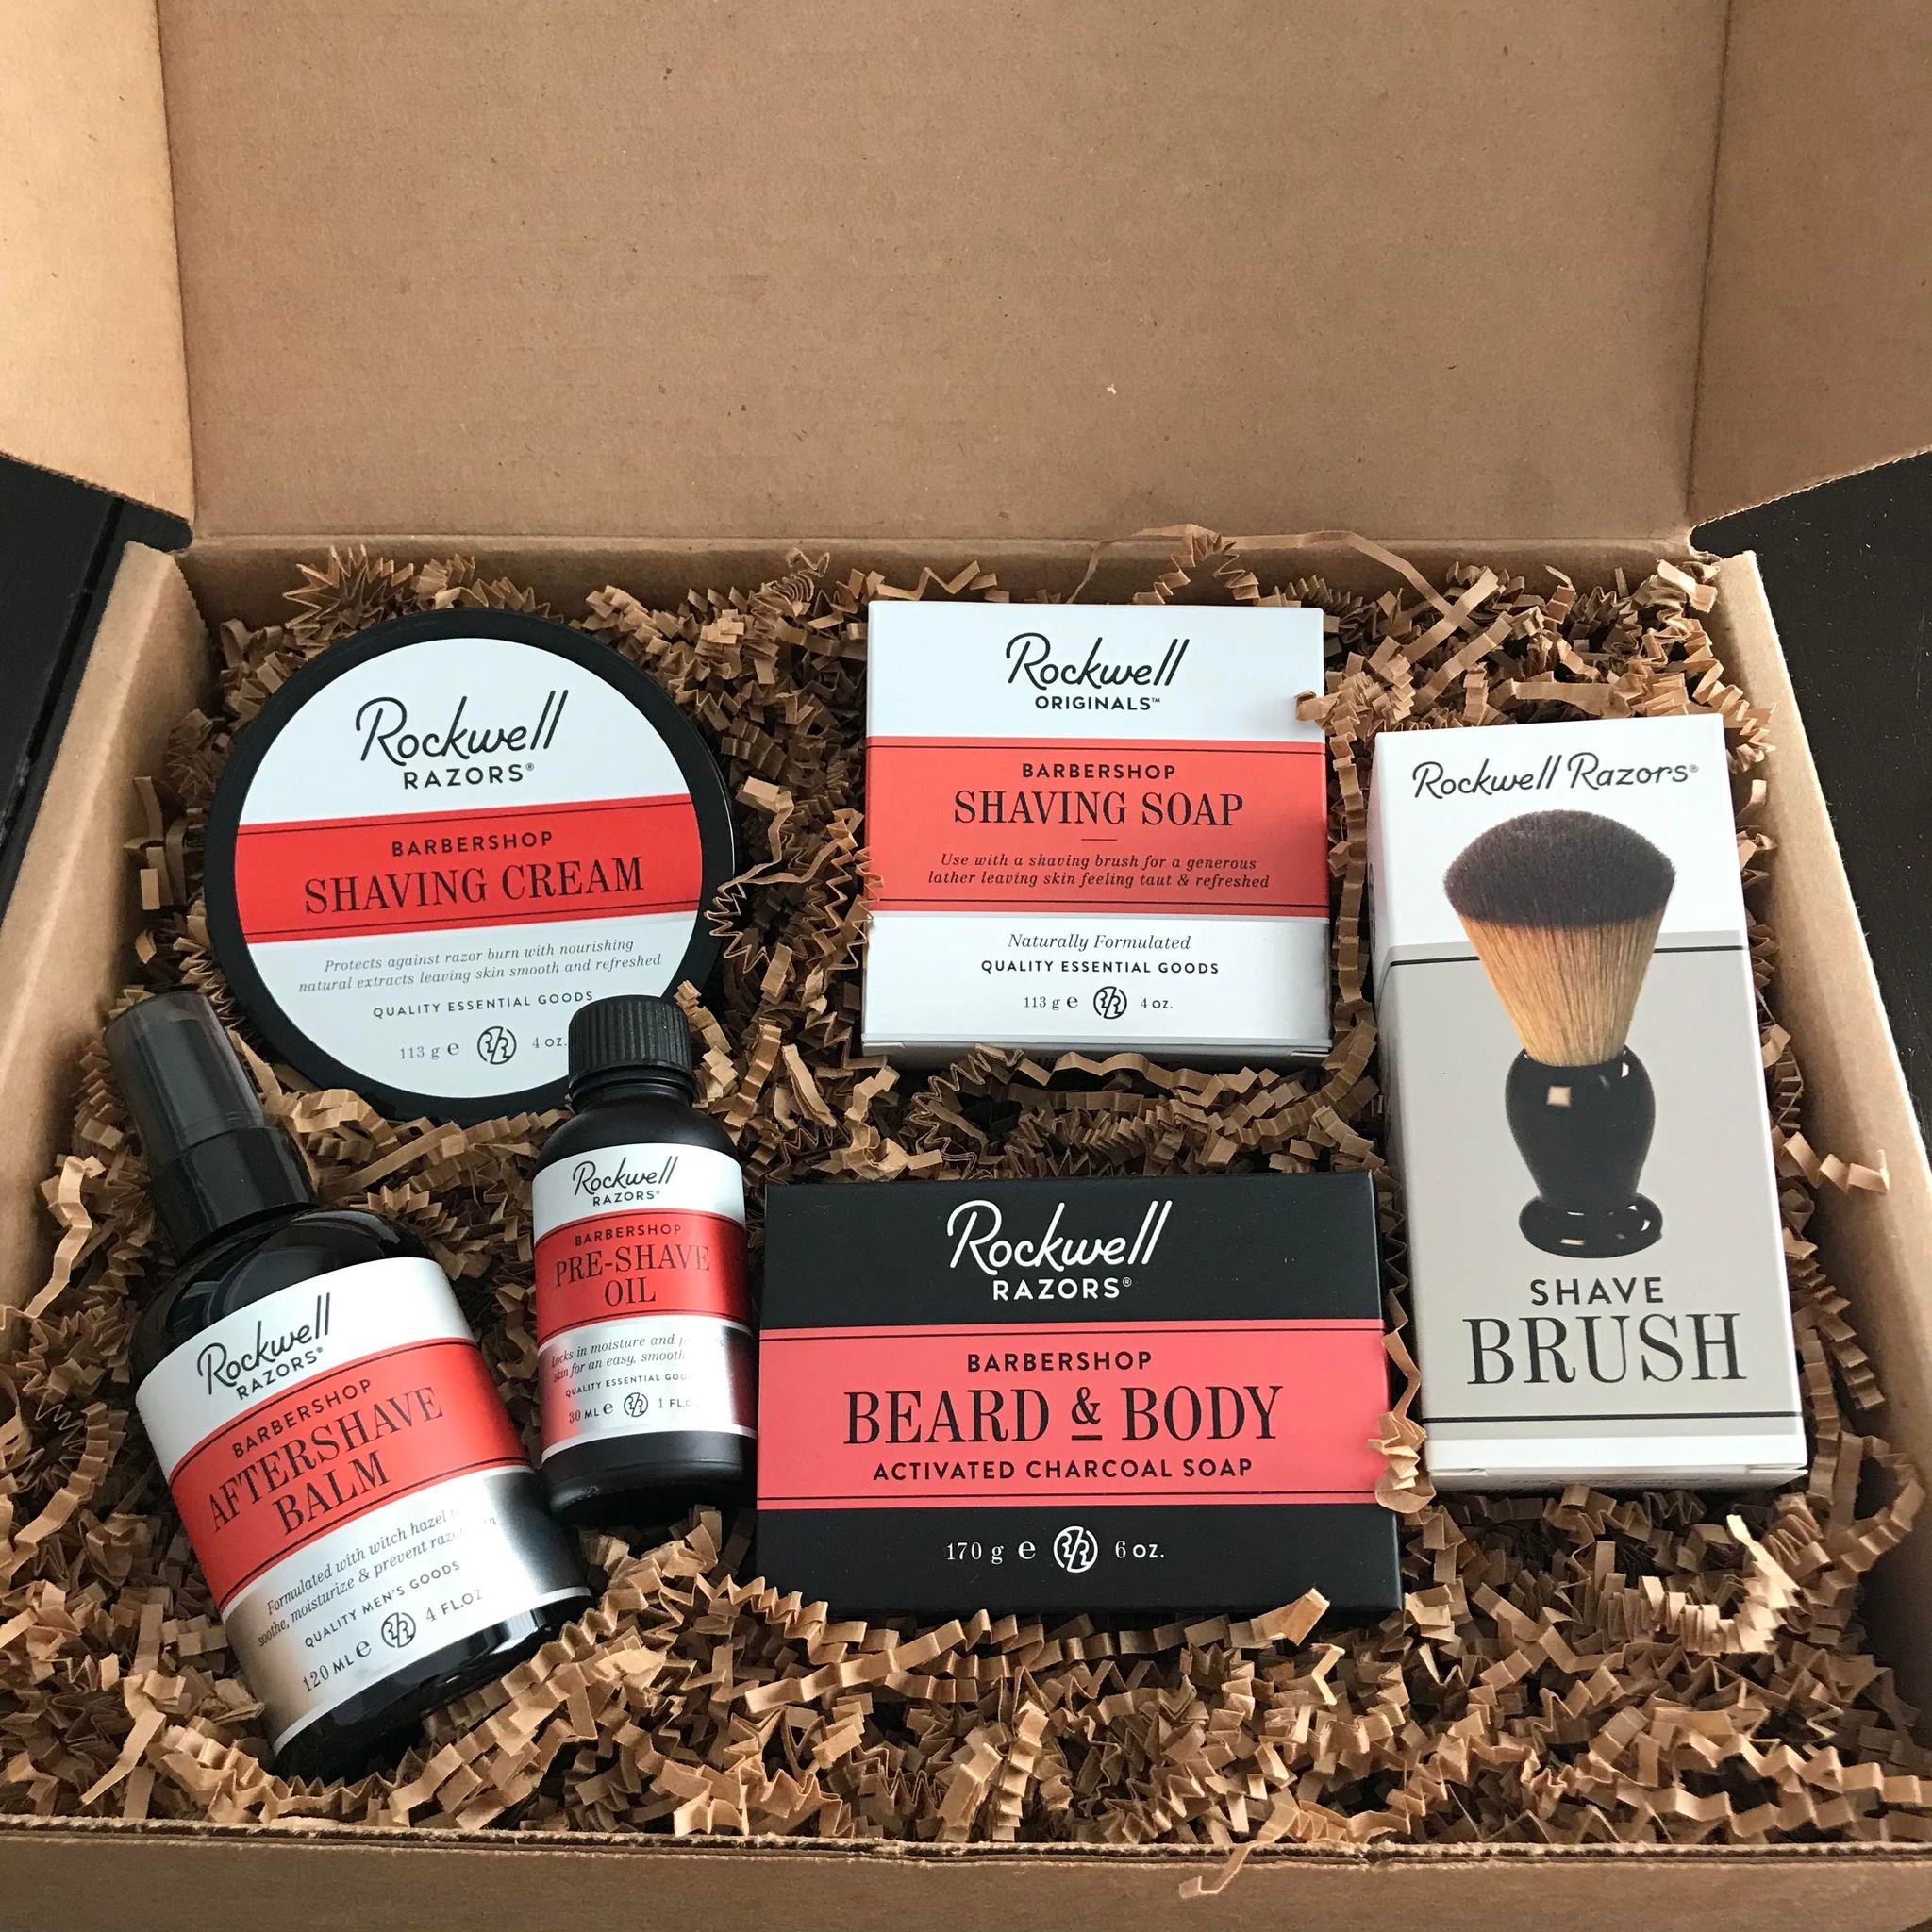 This Rockwell Shave Gift Set features six best selling Rockwell Razor shaving products -  Beard & Body Activated Charcoal Soap, Shaving Soap, Pre-Shave Oil, Shave Cream, Shave Brush and Aftershave Balm.